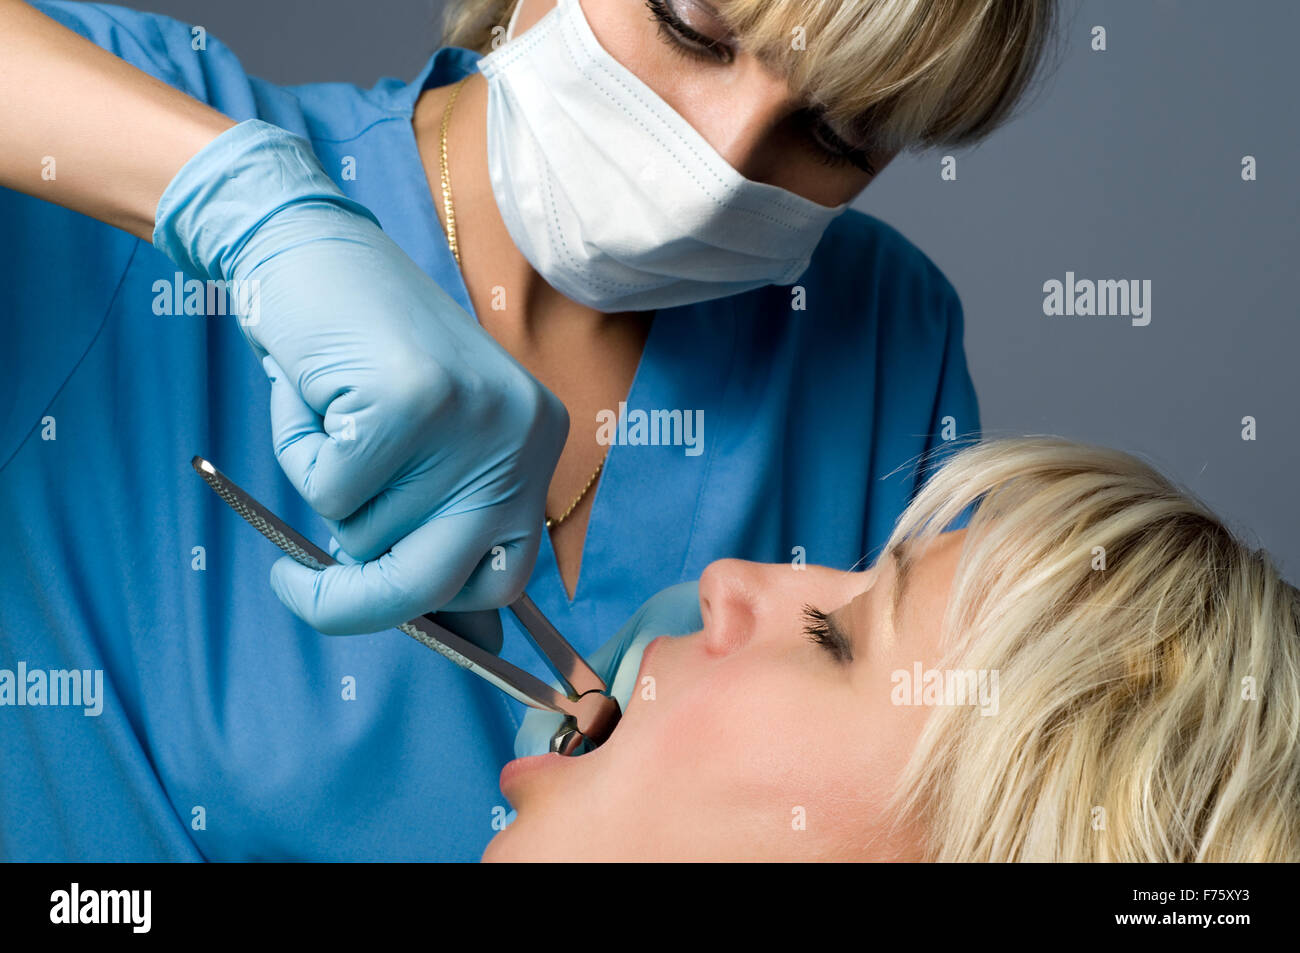 tooth extraction Stock Photo